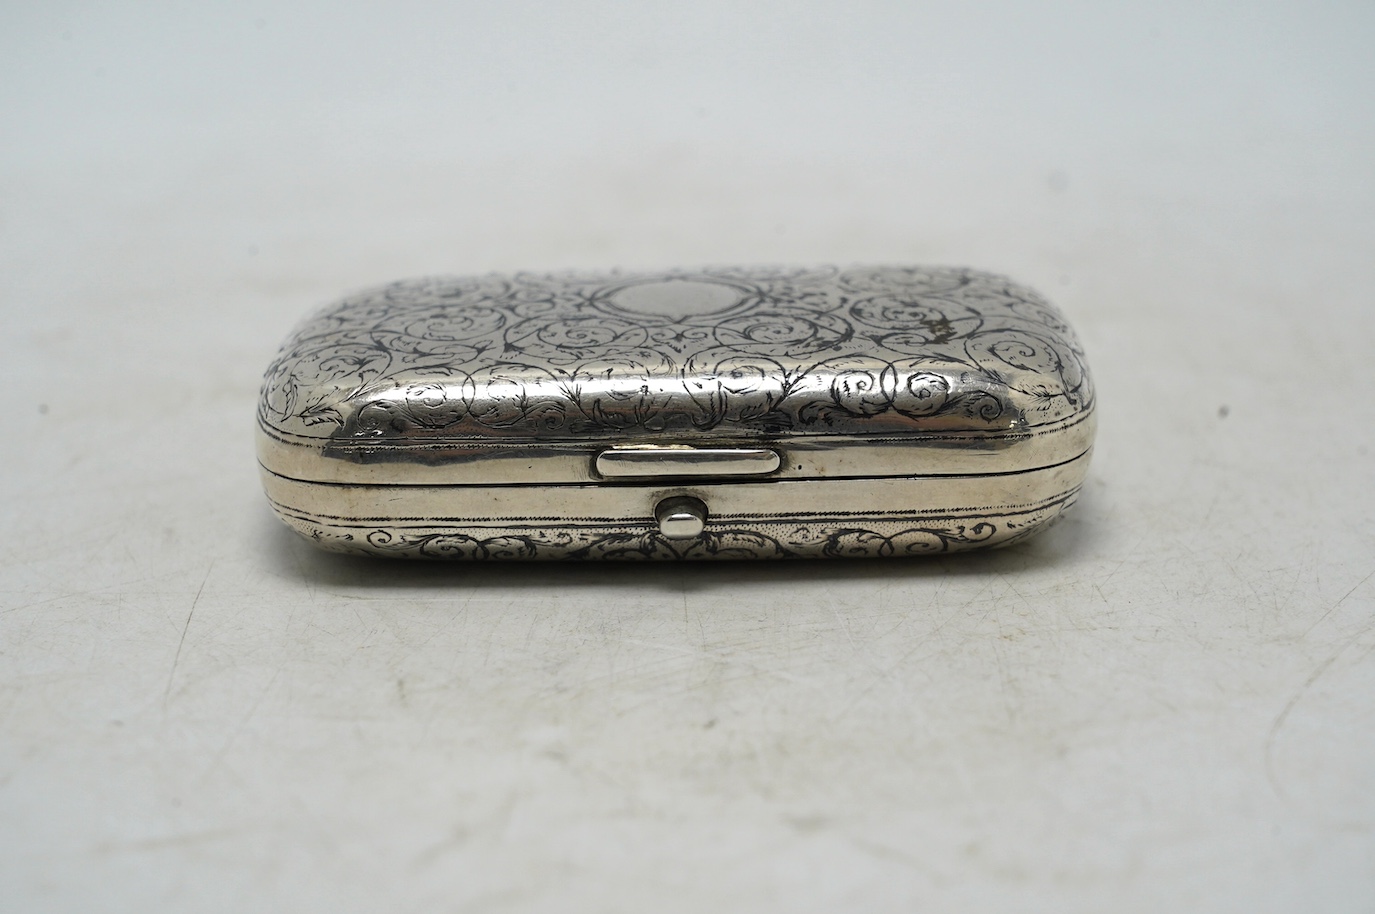 A late 19th century Russian 84 zolotnik and niello ovoid snuff box, Moscow, 1879, 96mm, gross 104 grams. Condition - poor to fair